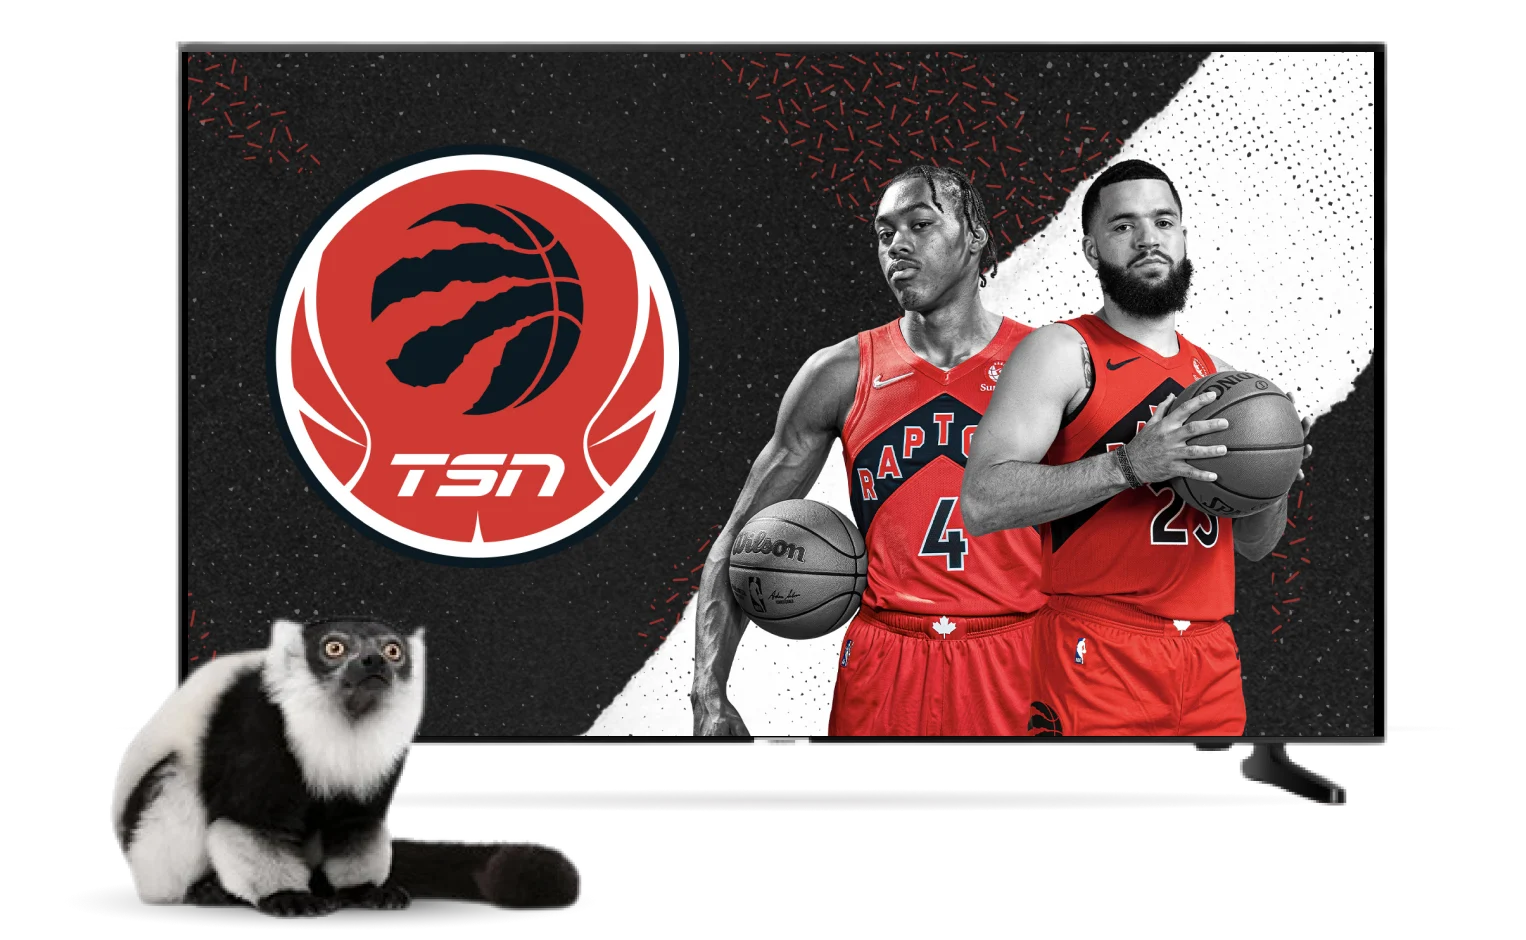 On a TV, Scottie Barnes and Fred VanVleet of the Toronto Raptors look intimidating as a terrified lemur watches.